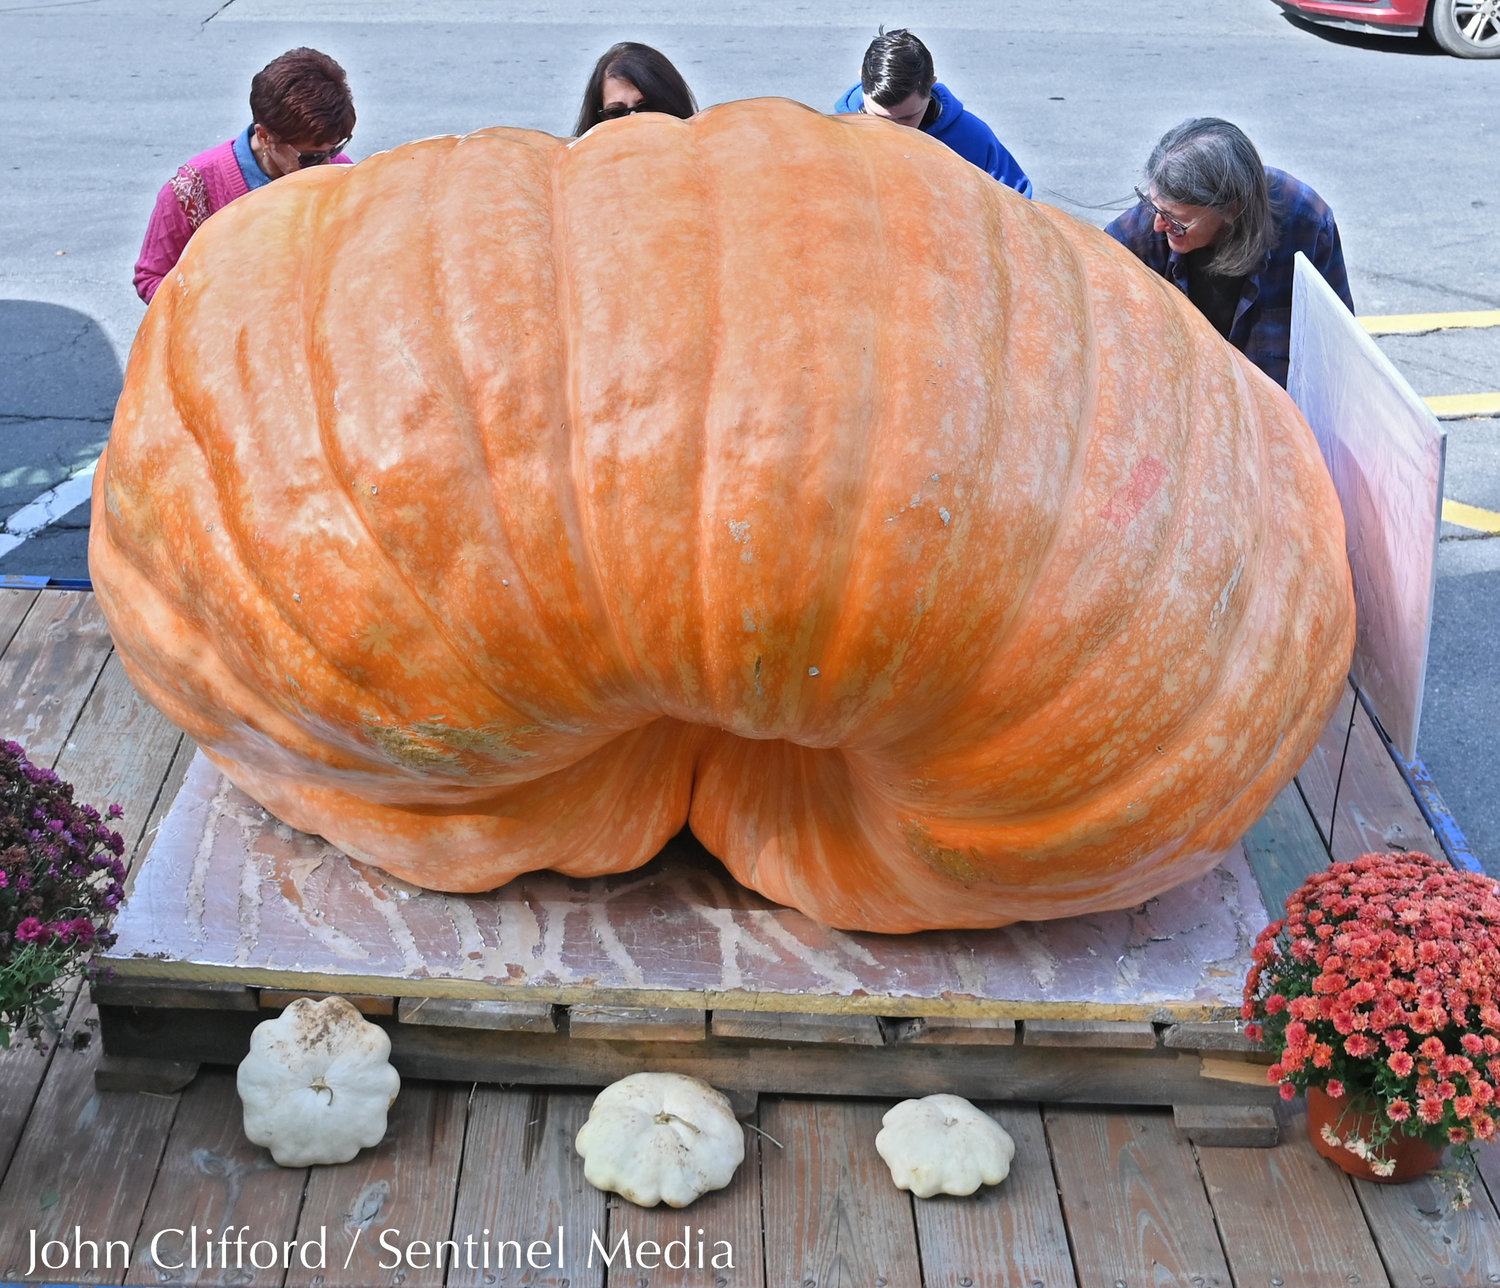 The great Pumpkin on display at the Clinton Farmers Market Thursday. The 1,925.5 pound pumpkin was grown by Todd Kogut.